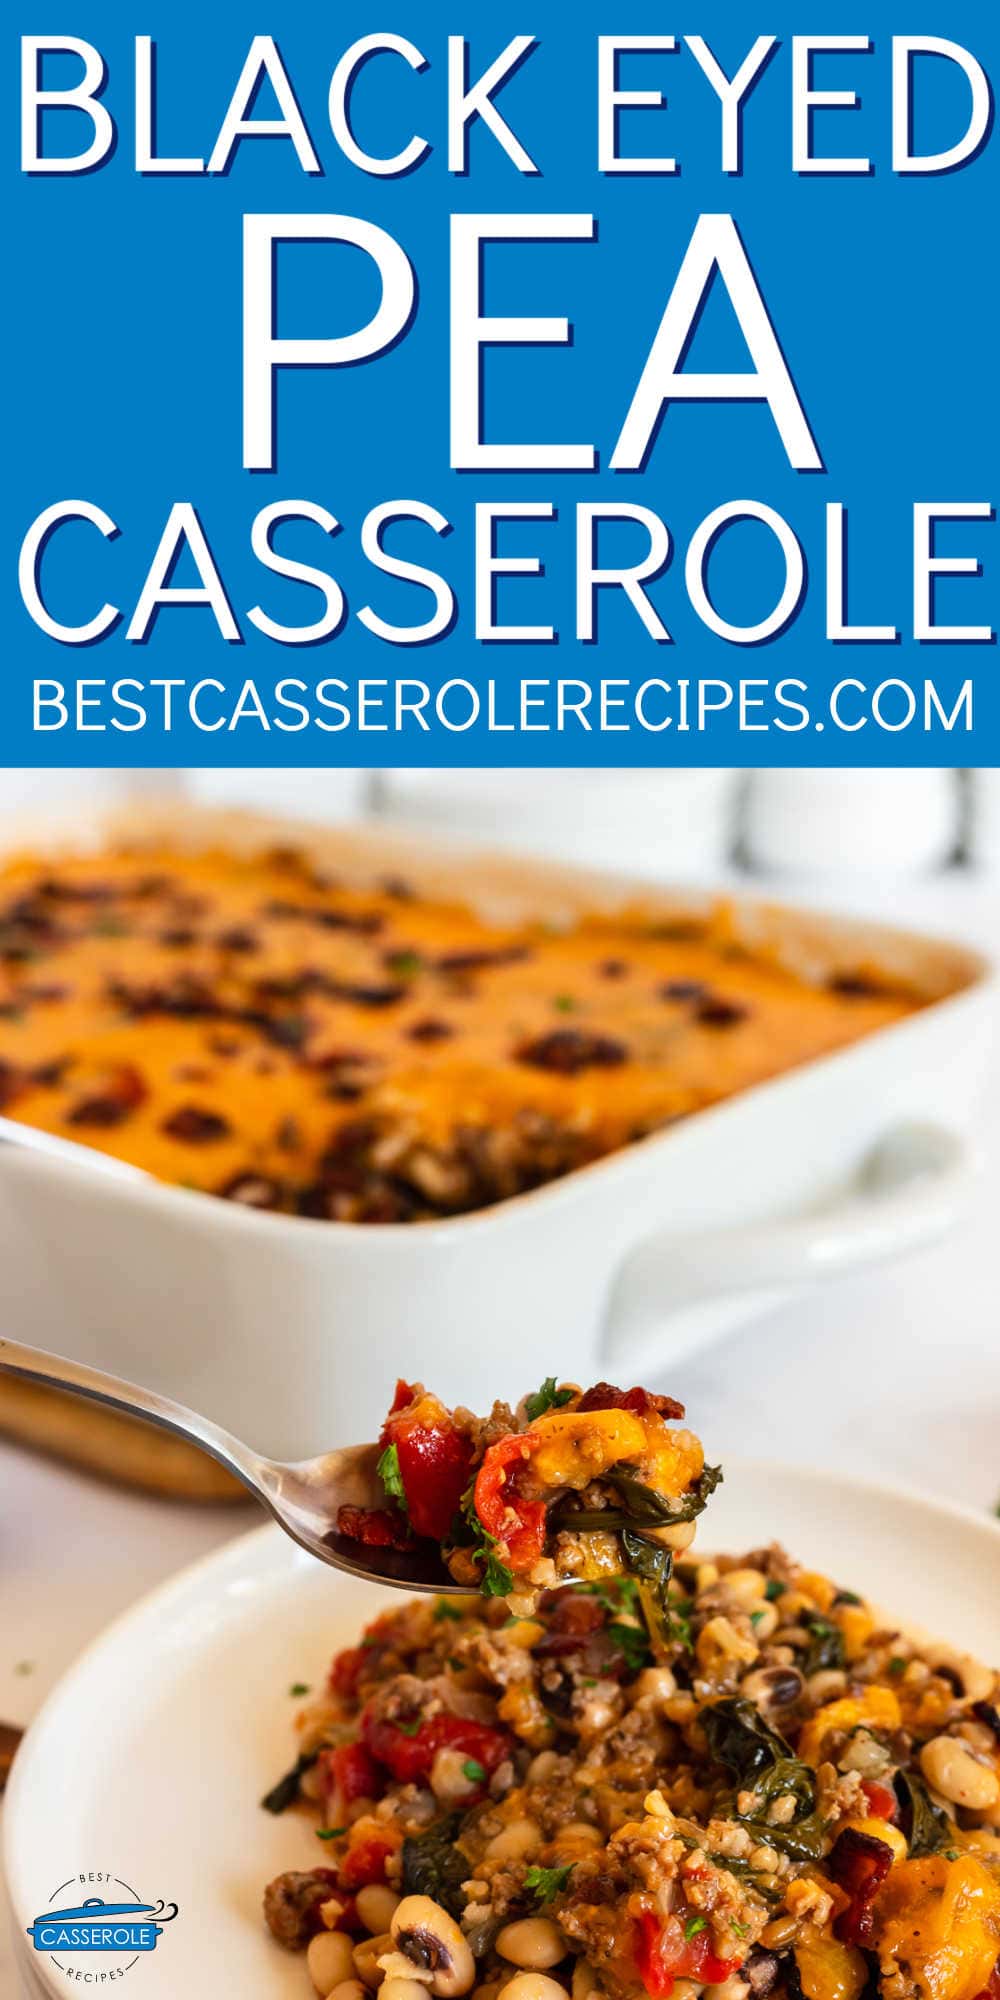 fork of casserole with blue banner and text "black eyed pea casserole"